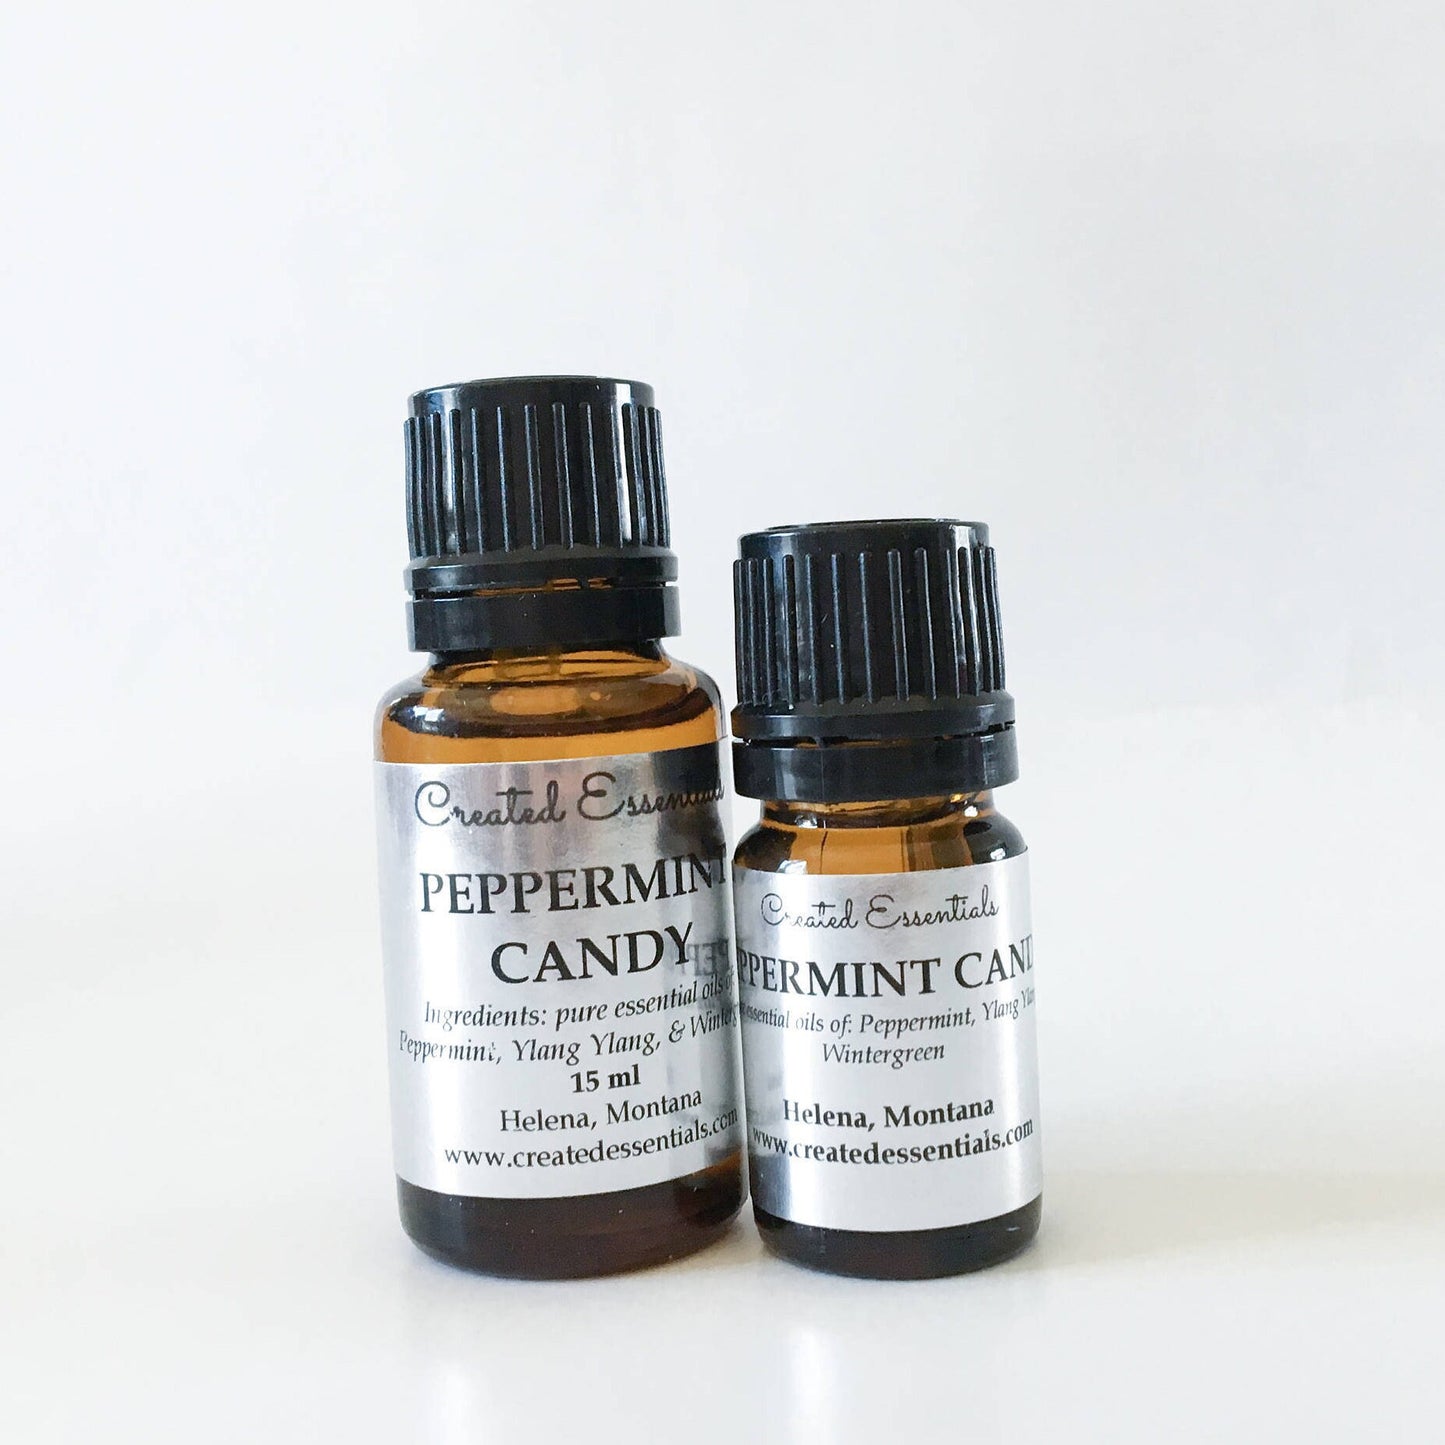 Peppermint Candy Oil Blend | Christmas Essential Oil Blend | Peppermint Candy Blend Christmas | Holiday Diffuser Blend | Aromatherapy Blend